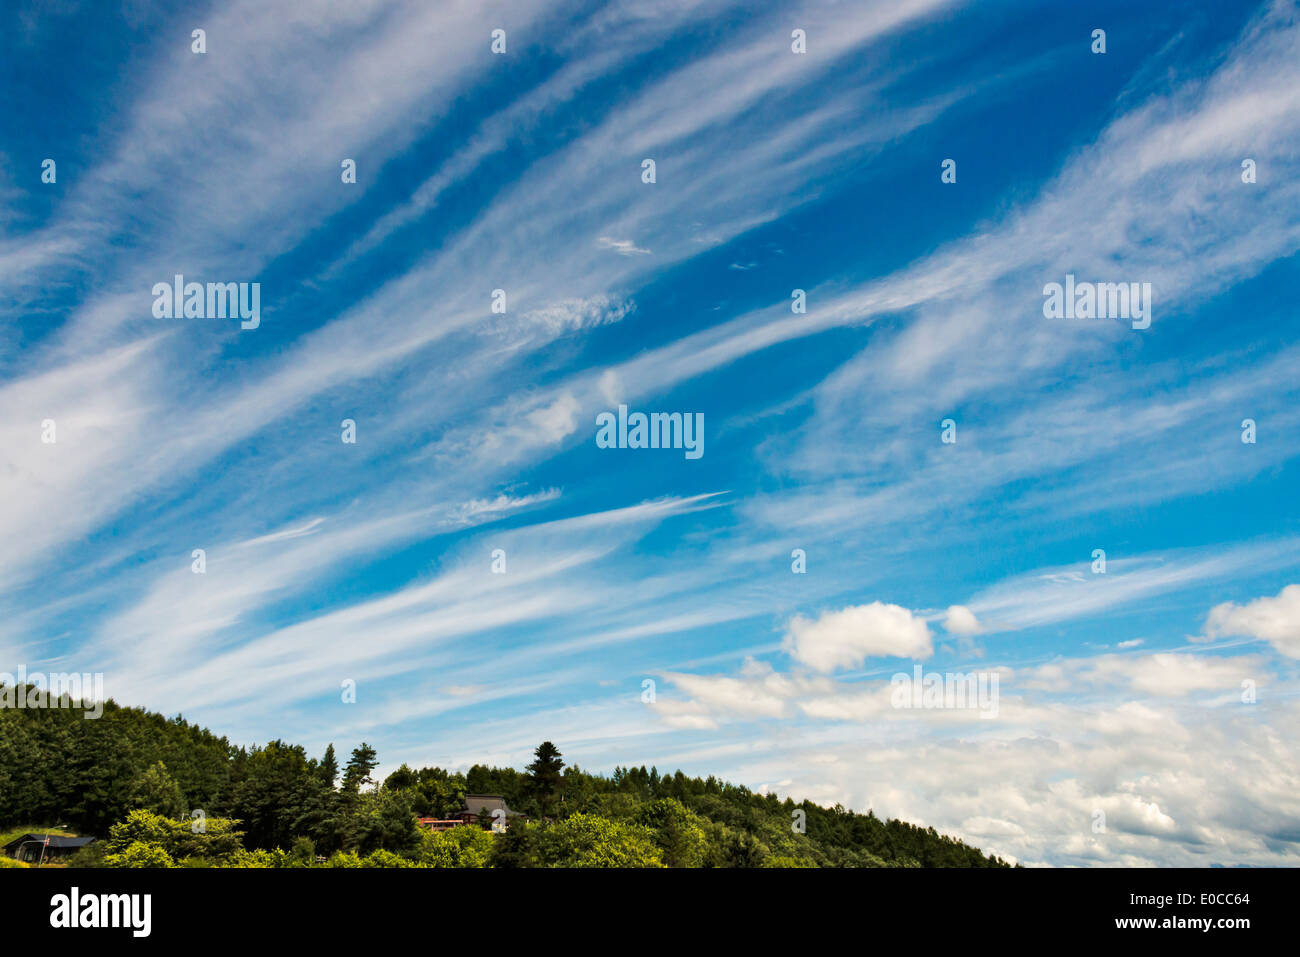 House in the forest with sky of clouds, Furano, Hokkaido Prefecture, Japan Stock Photo